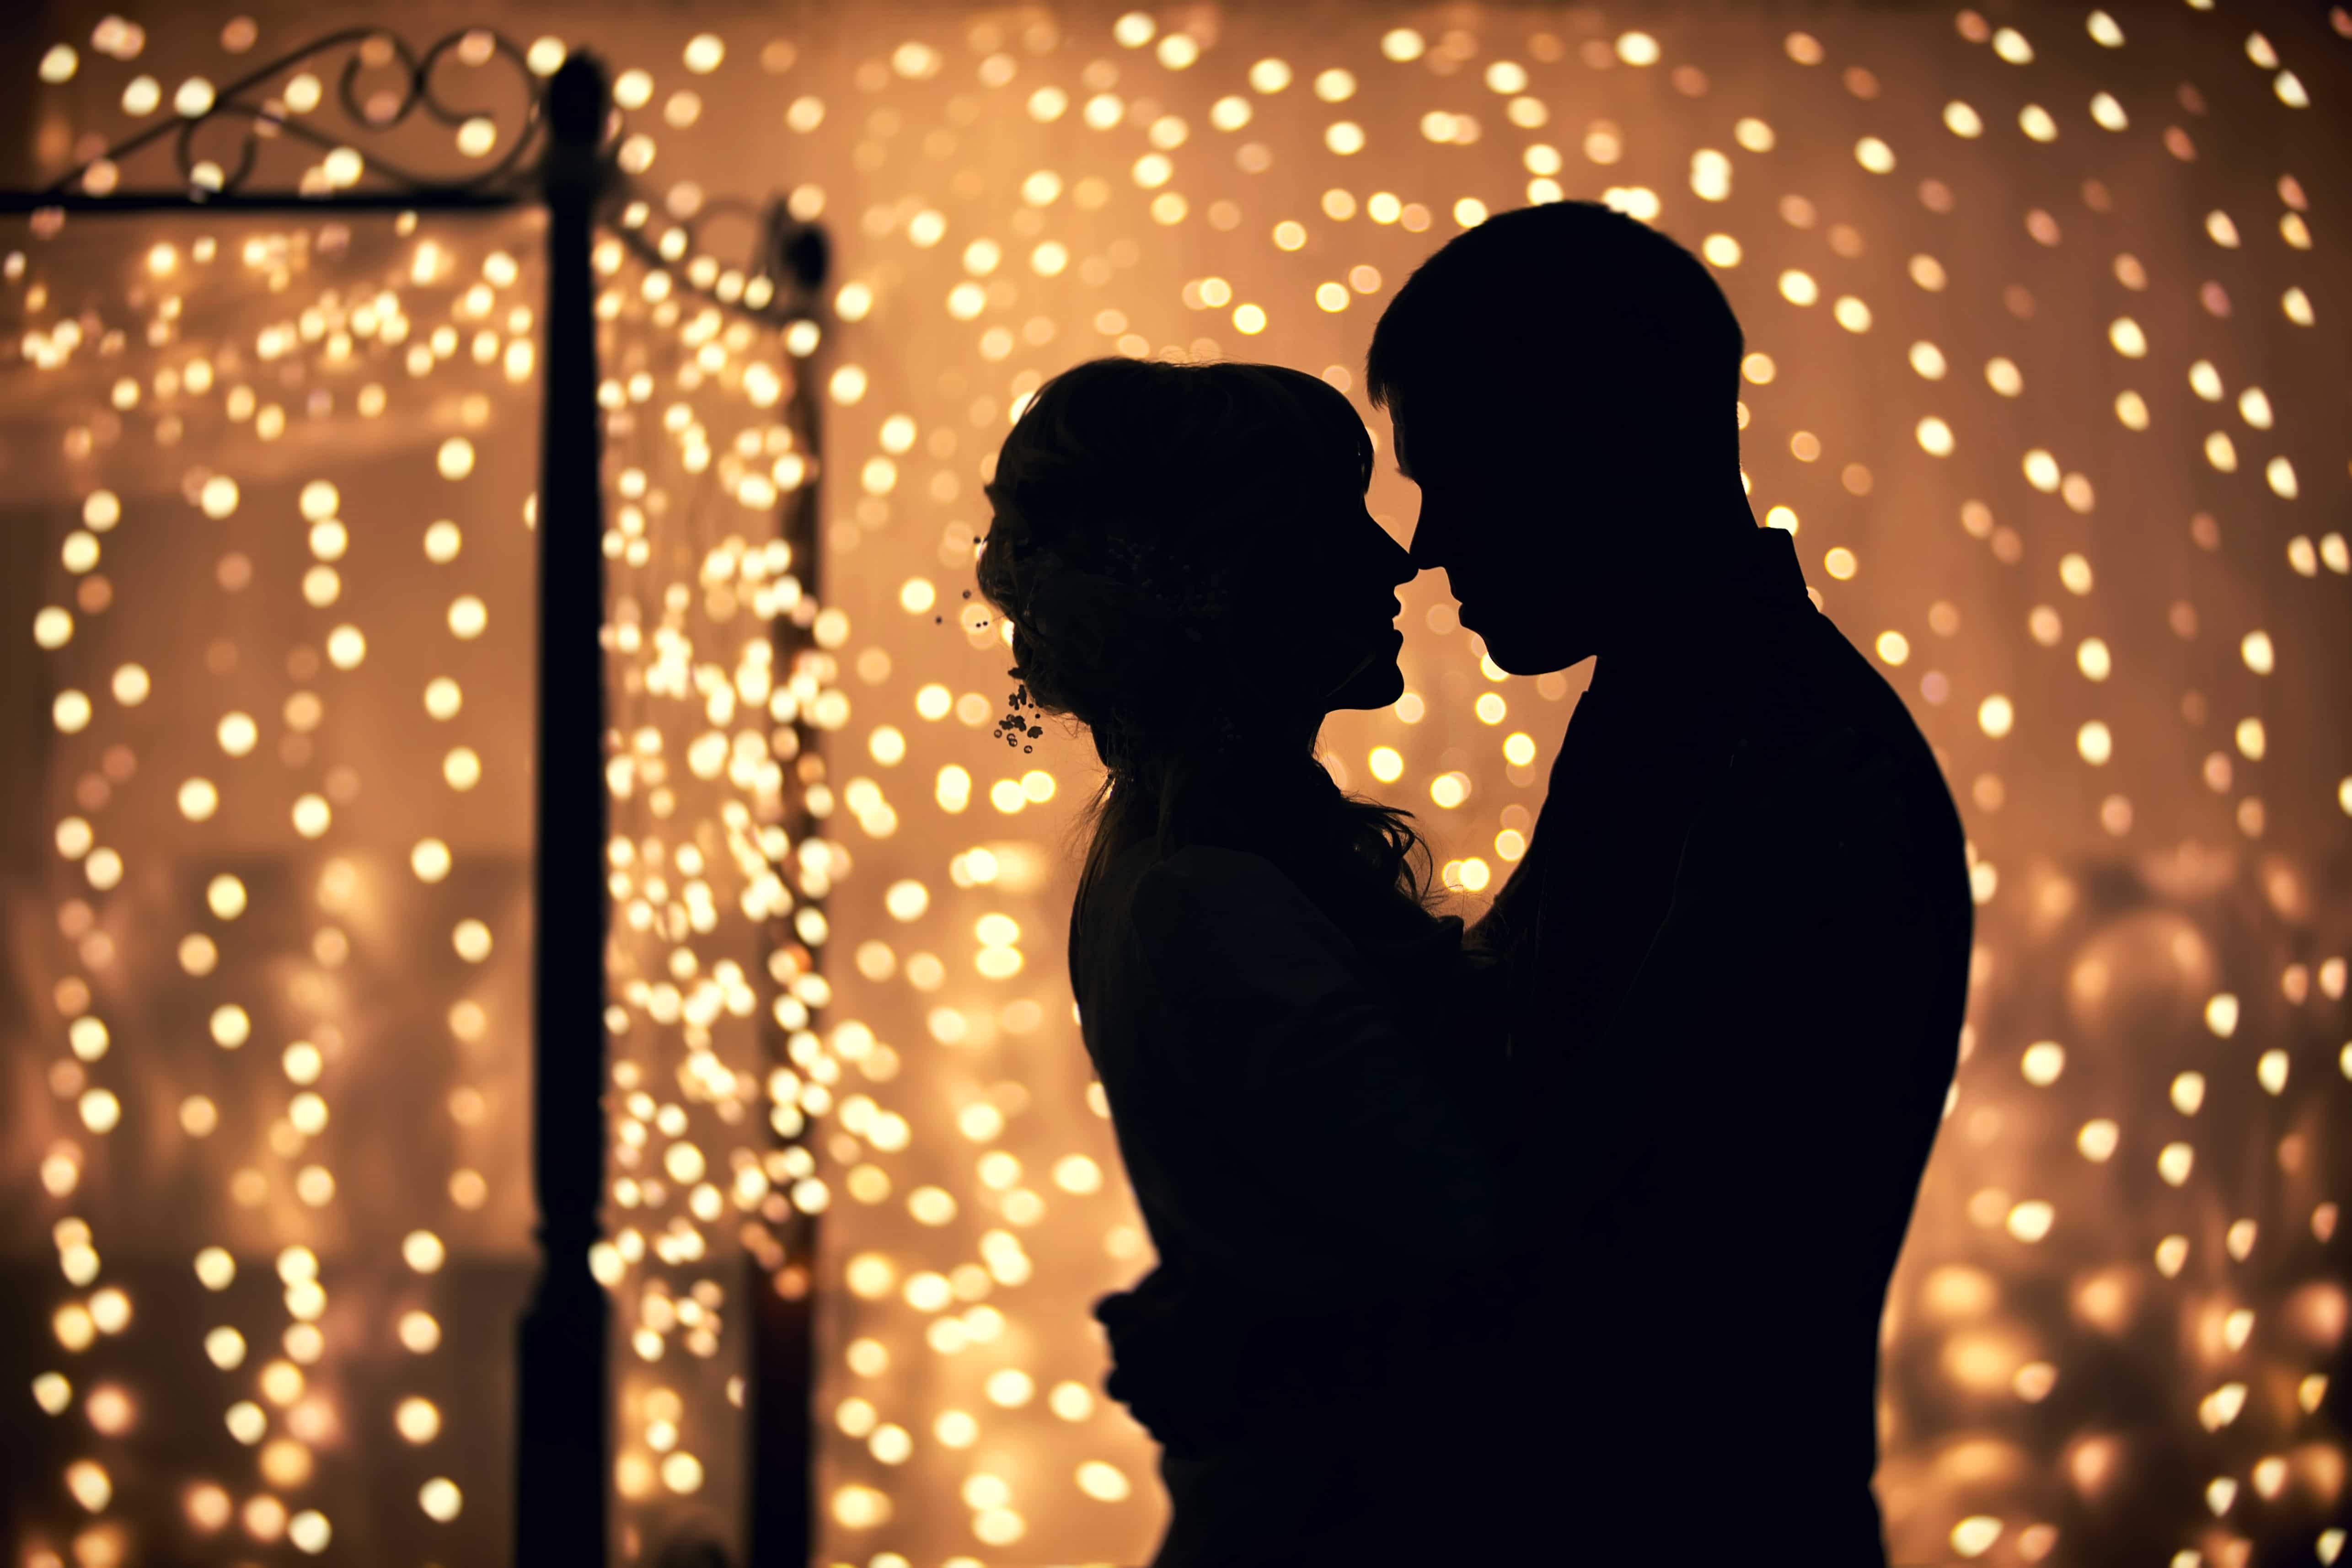 Silhouette of couple embracing with many small decorative lights glowing as the backdrop.